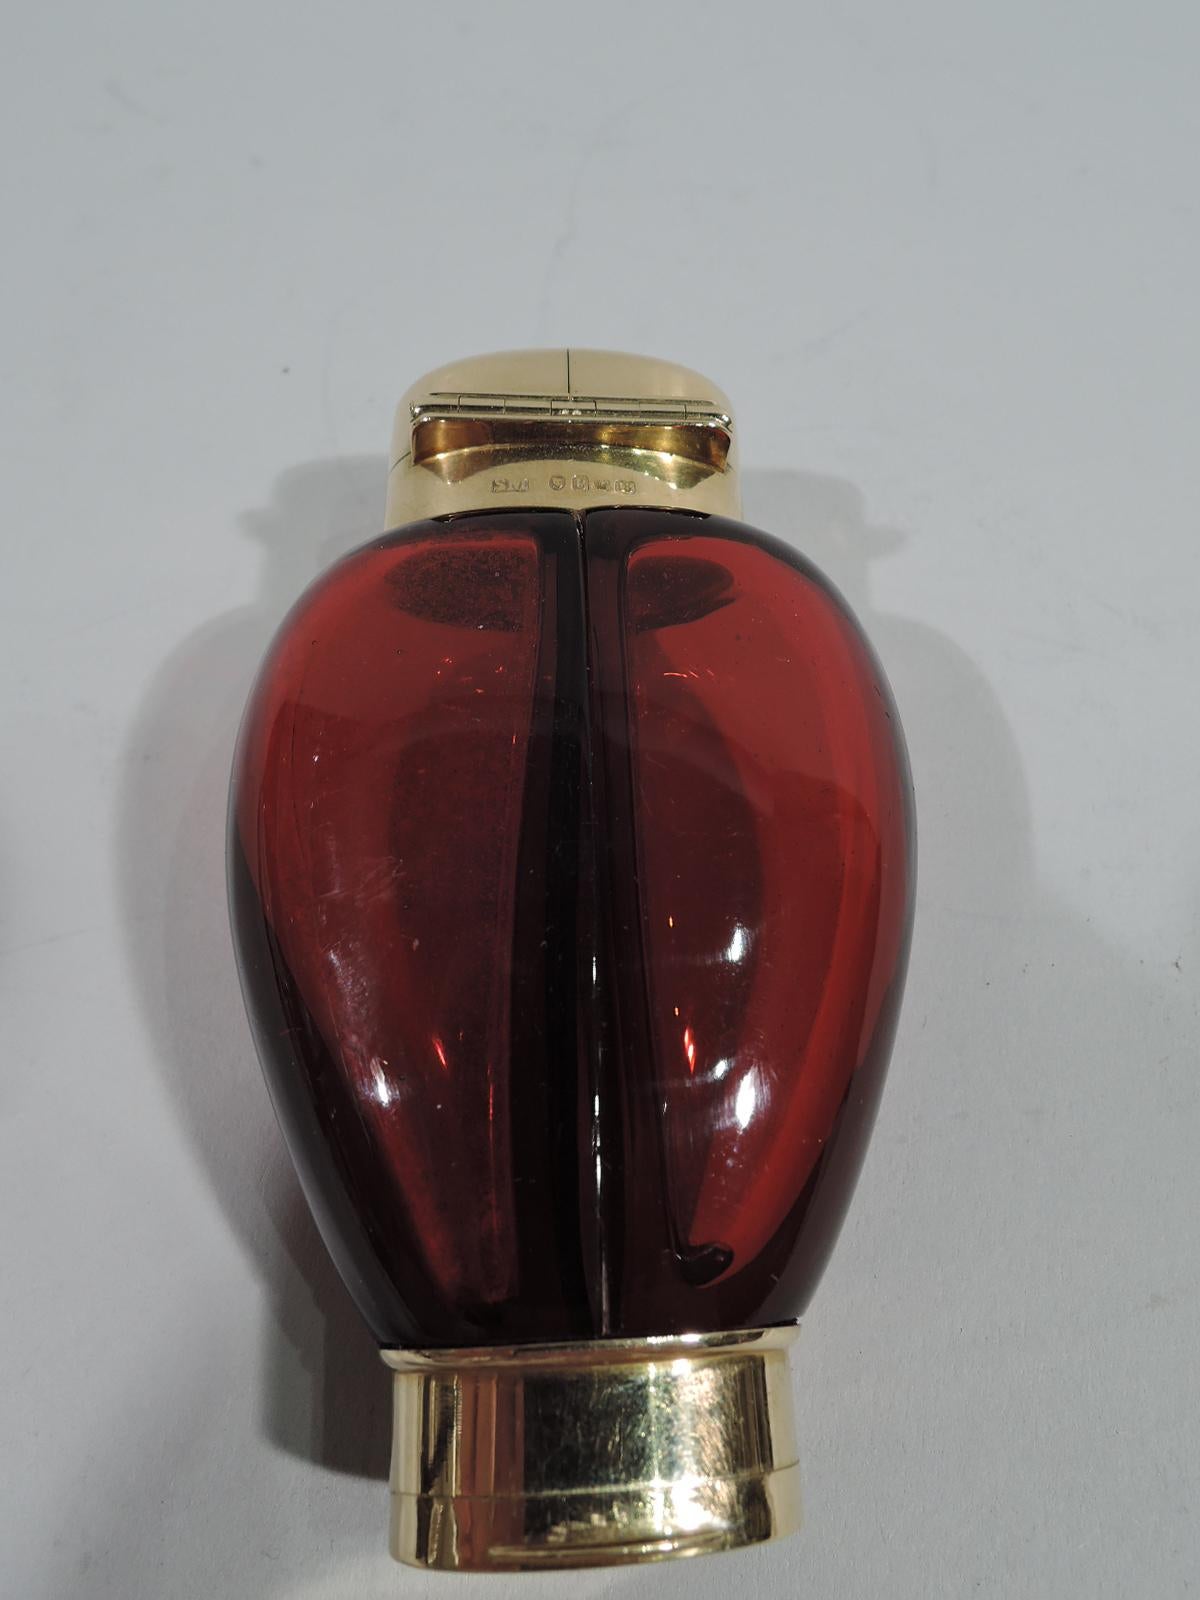 Unusual ruby glass double perfume with 18K gold mounts. Made by Samson Mordan in Sheffield in 1869. Ovoid bottle comprising two parts with vertical join. Oval gold neck with hinged and split cover. Two clear glass stoppers with short plugs. On cover